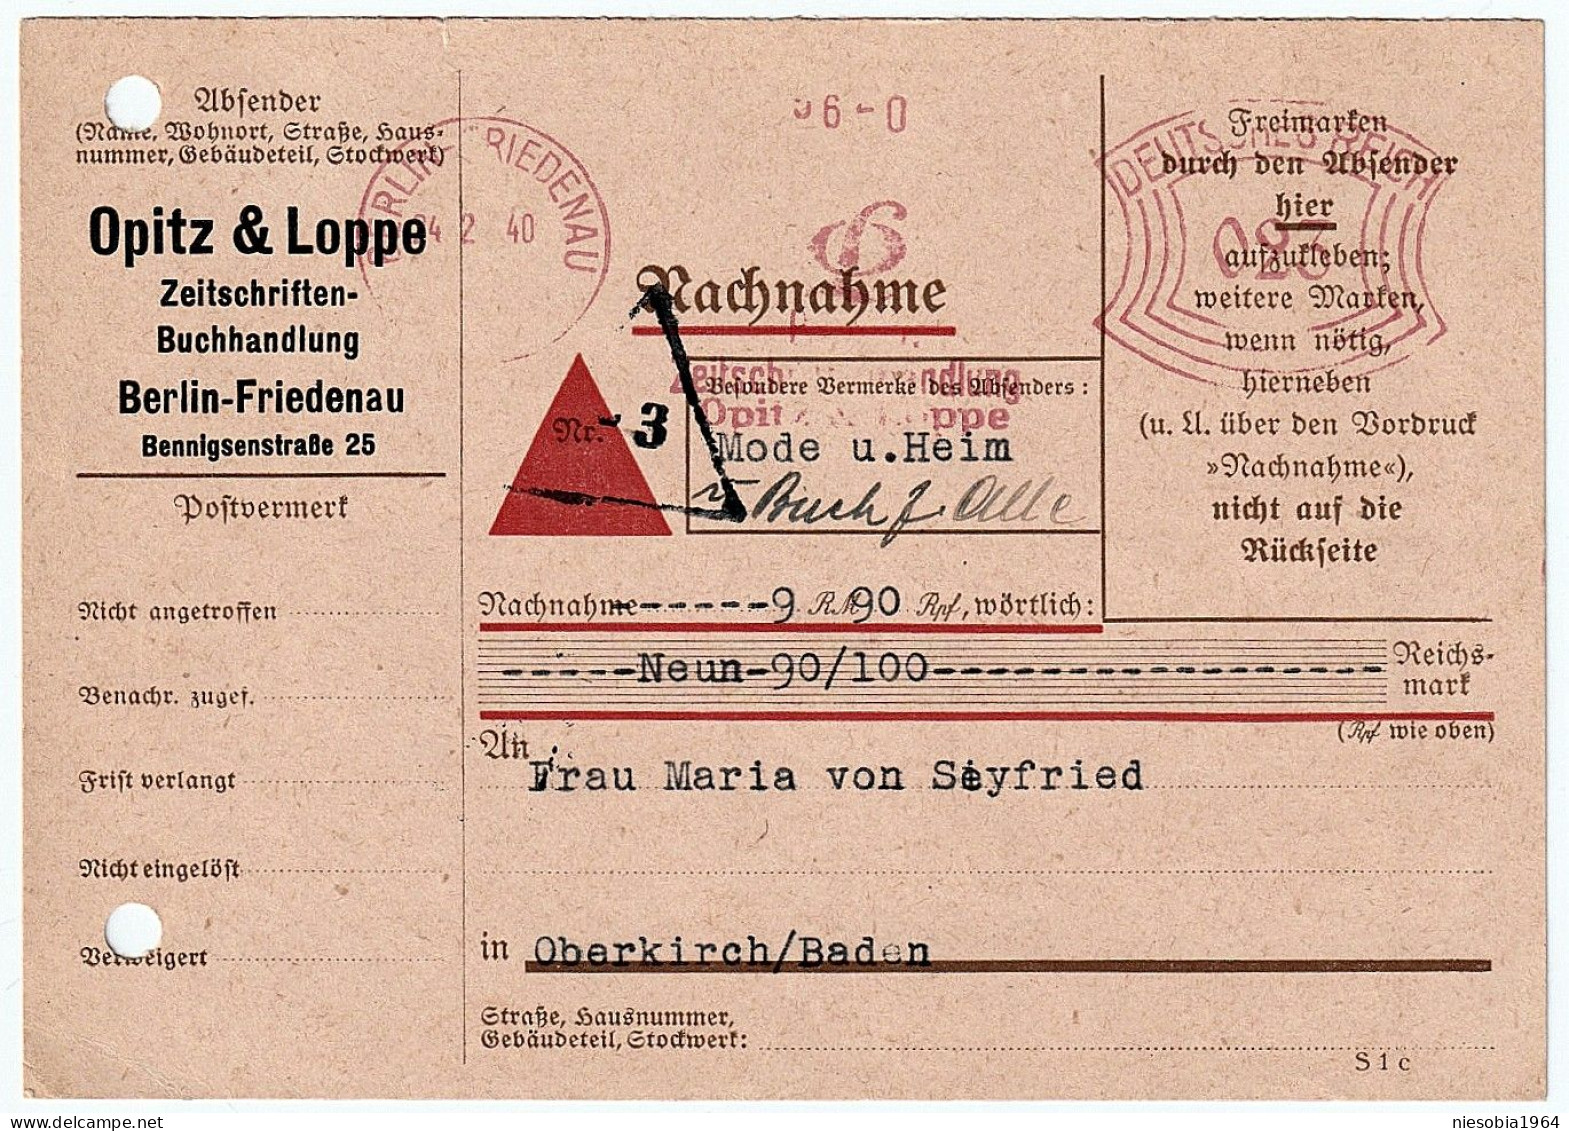 "Opitz & Loppe" To Maria Von Seyfried In Oberkirch - Company Postcard With Special Seal DR 023 Berlin February 24, 1940 - Postcards